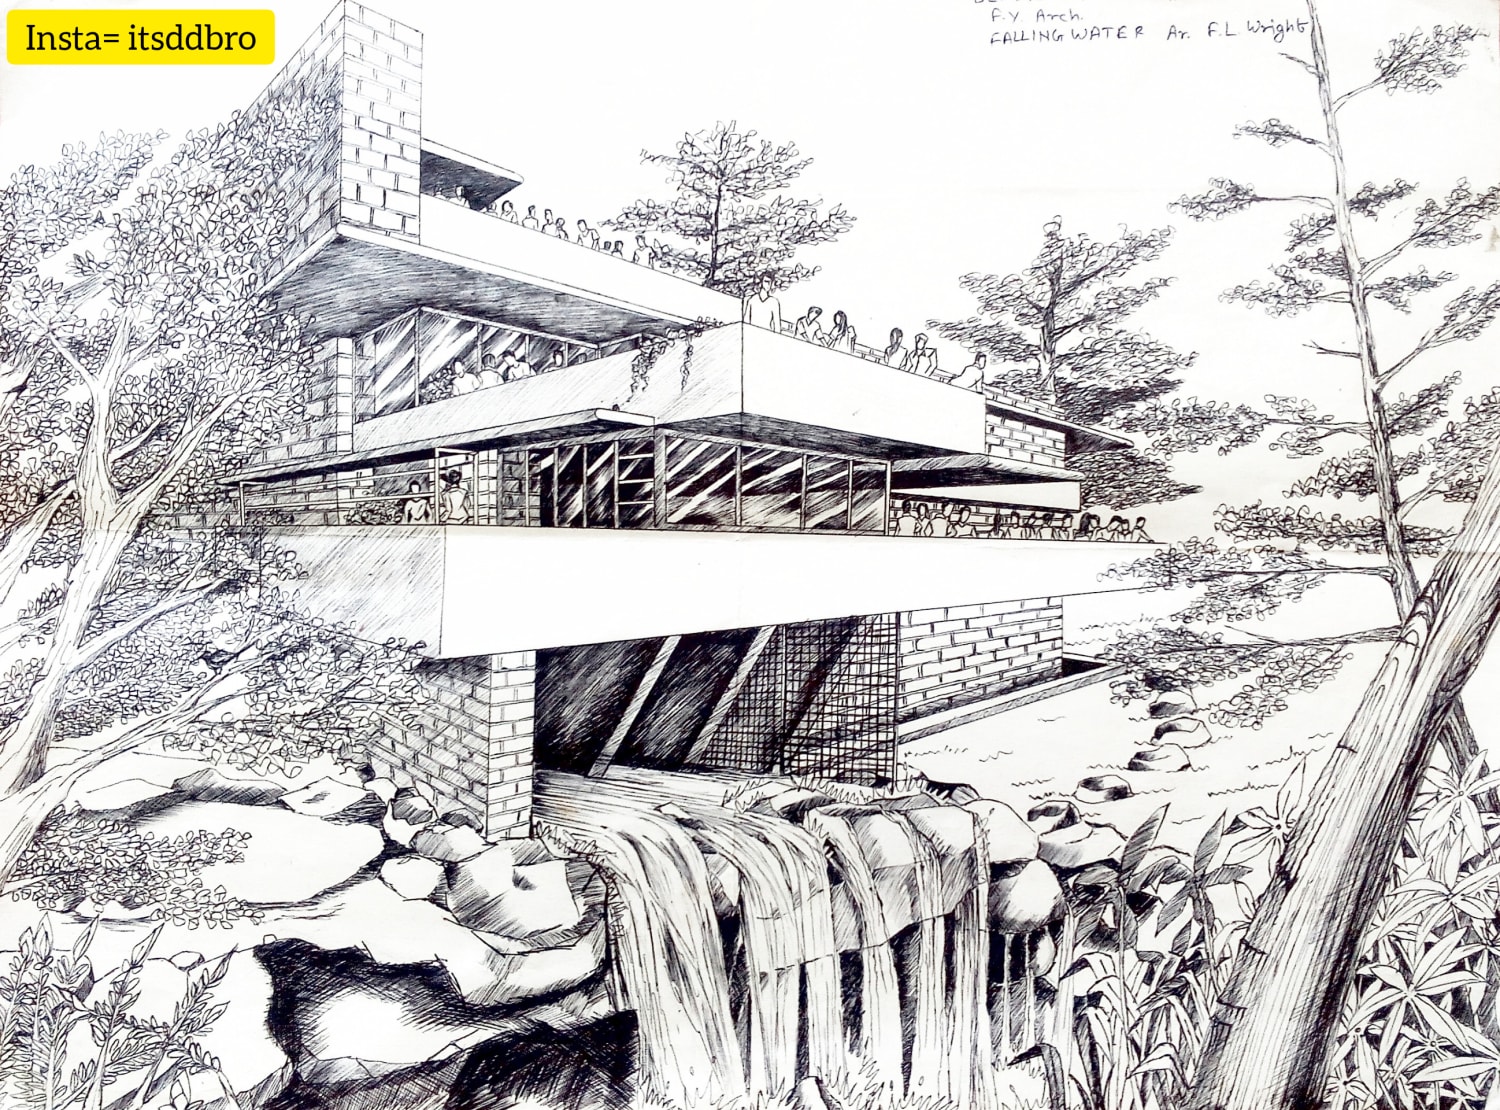 Ballpoint pen sketch of most famous building "Falling Waters" i did when i was in 1st year of Architecture